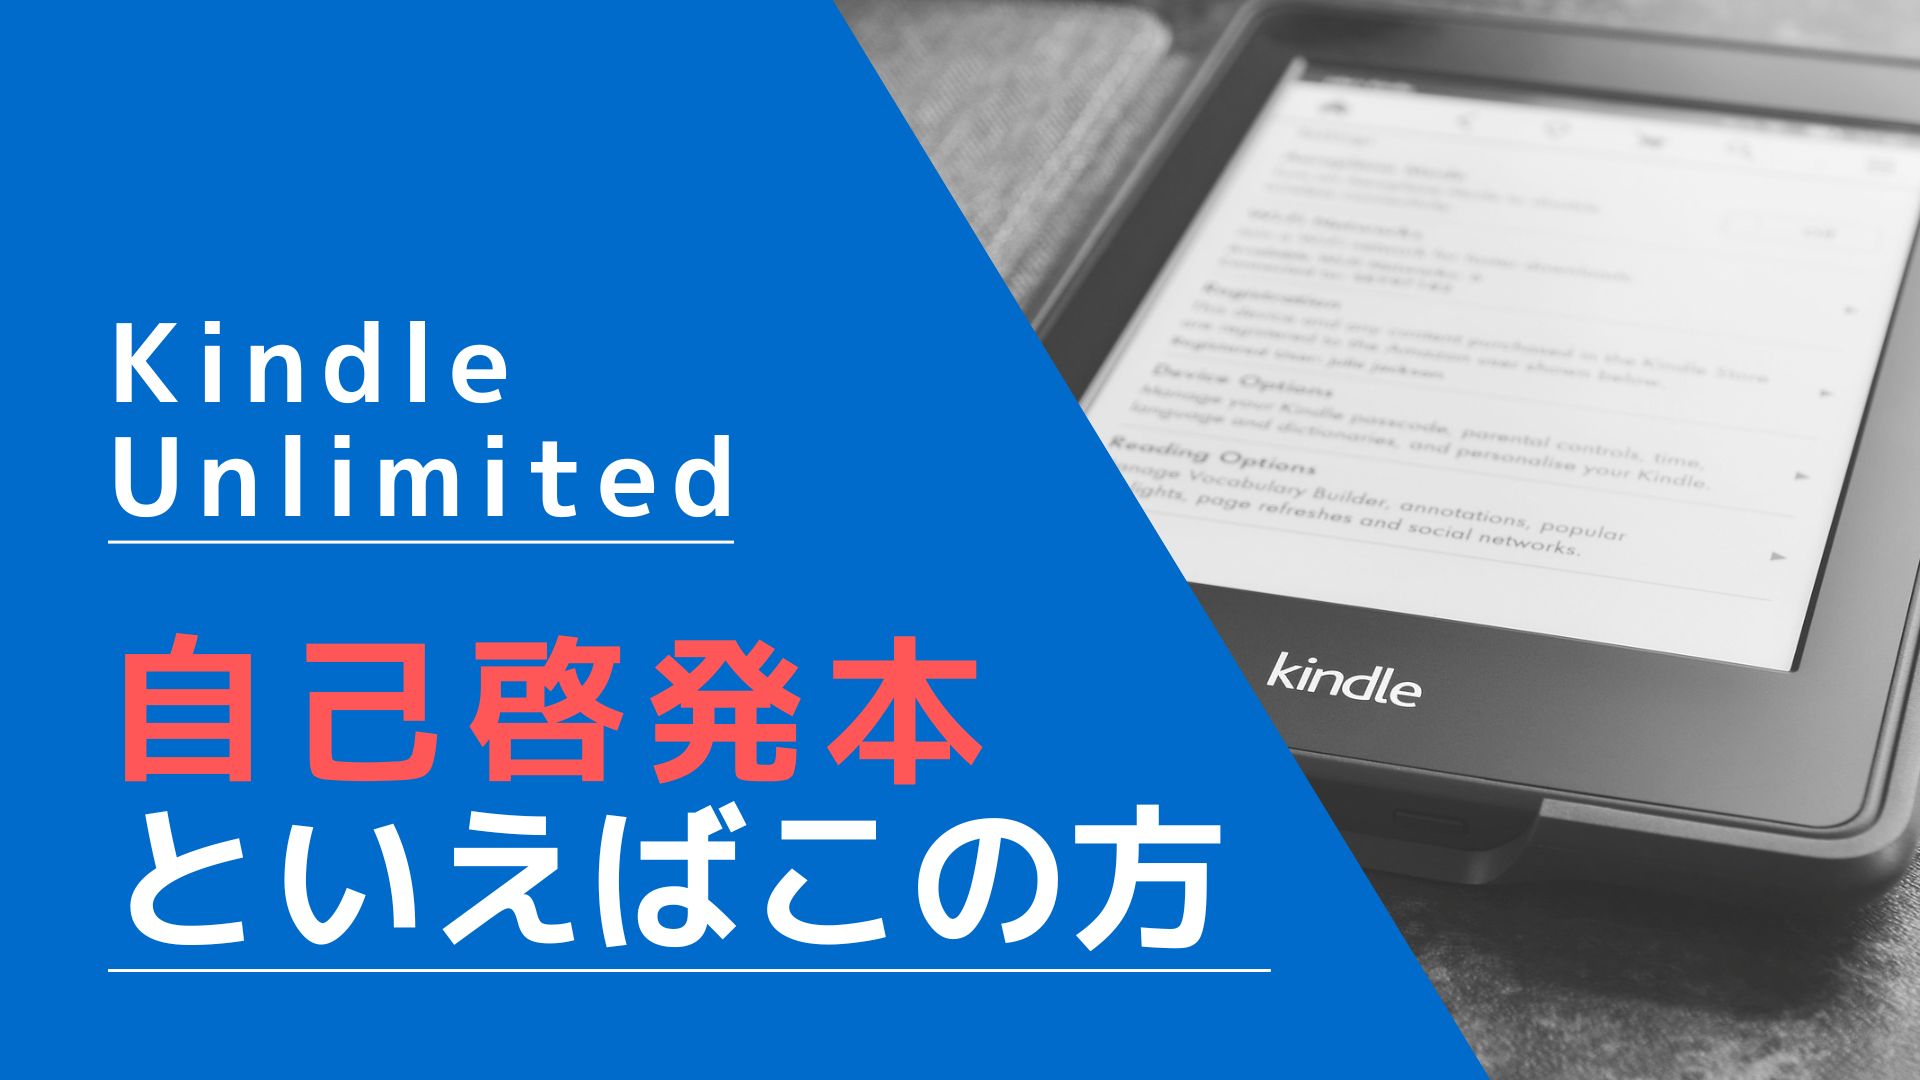 Kindle Unlimited×自己啓発本といえばこの方